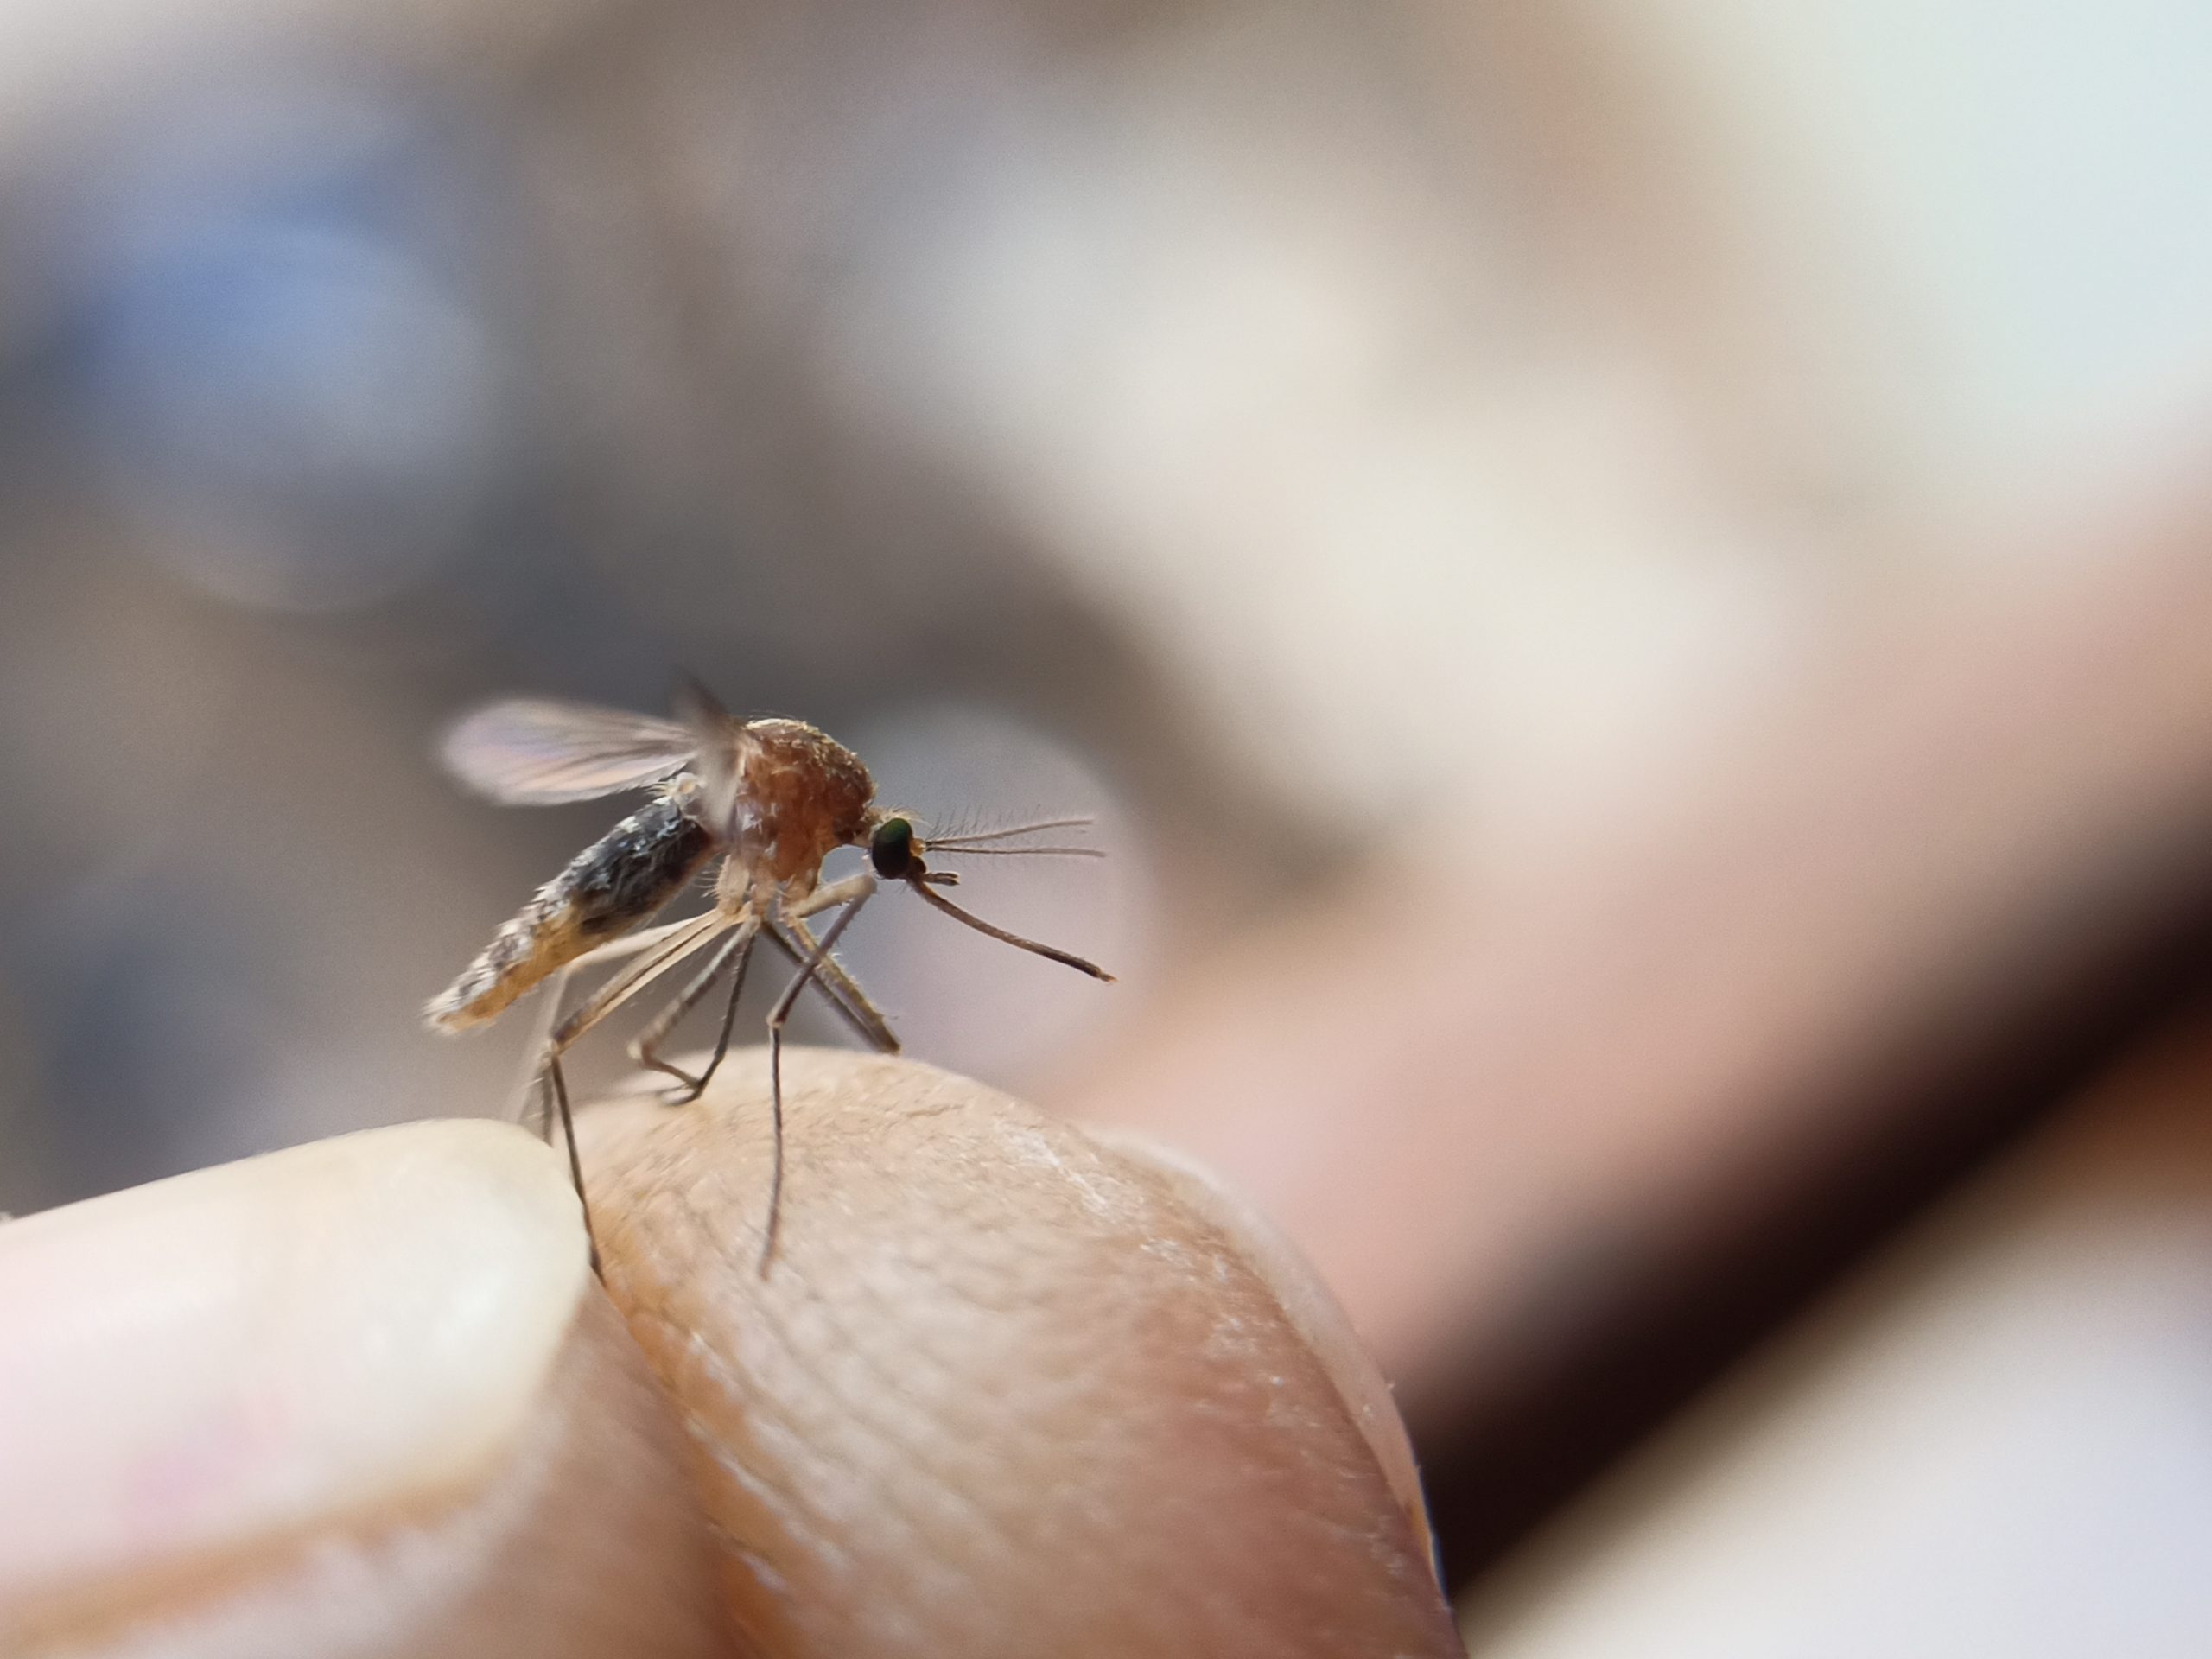 A mosquito on finger tip